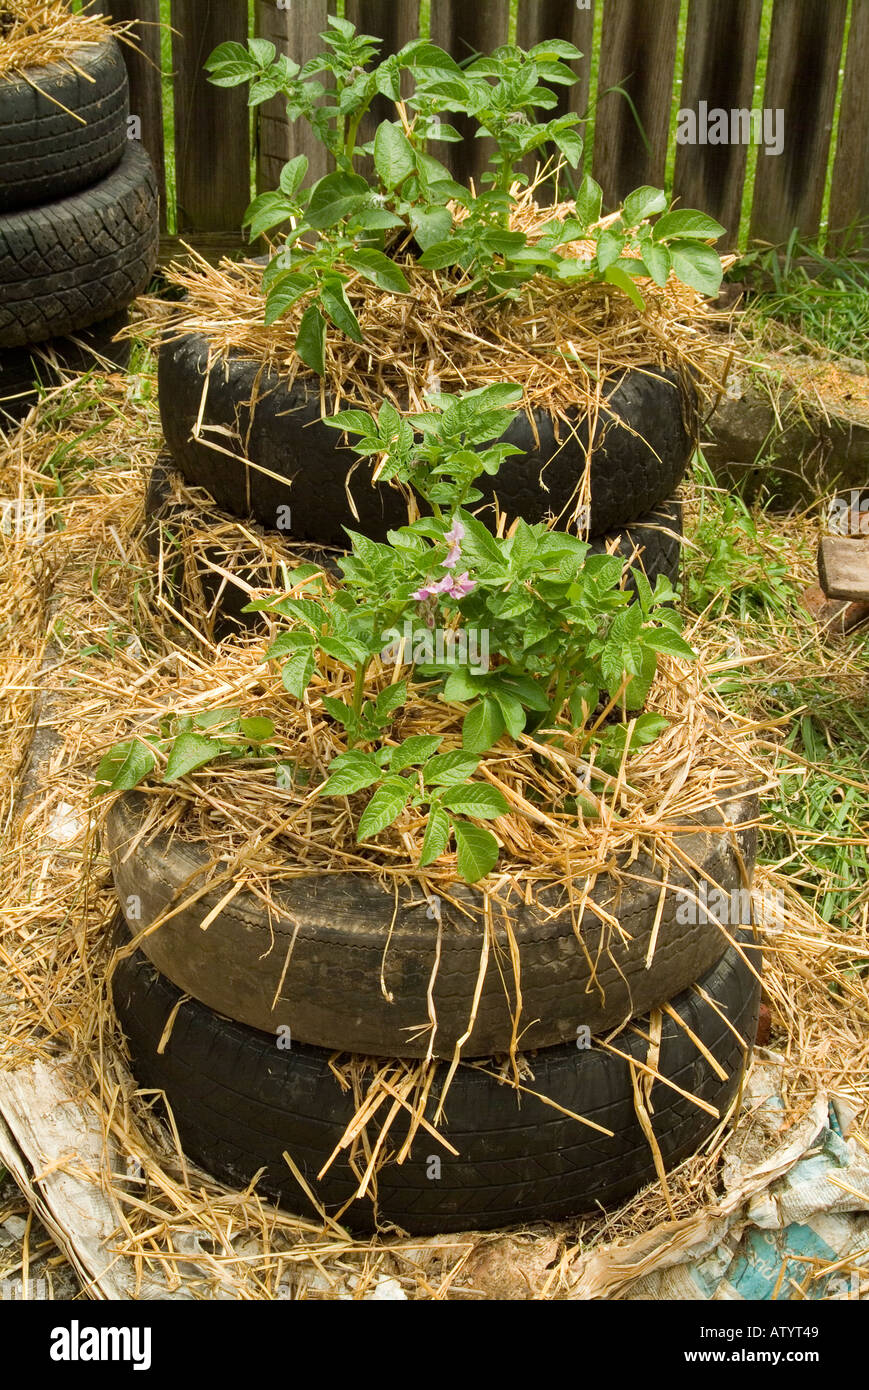 Potatoes being grown in used old automobile tyres Stock Photo